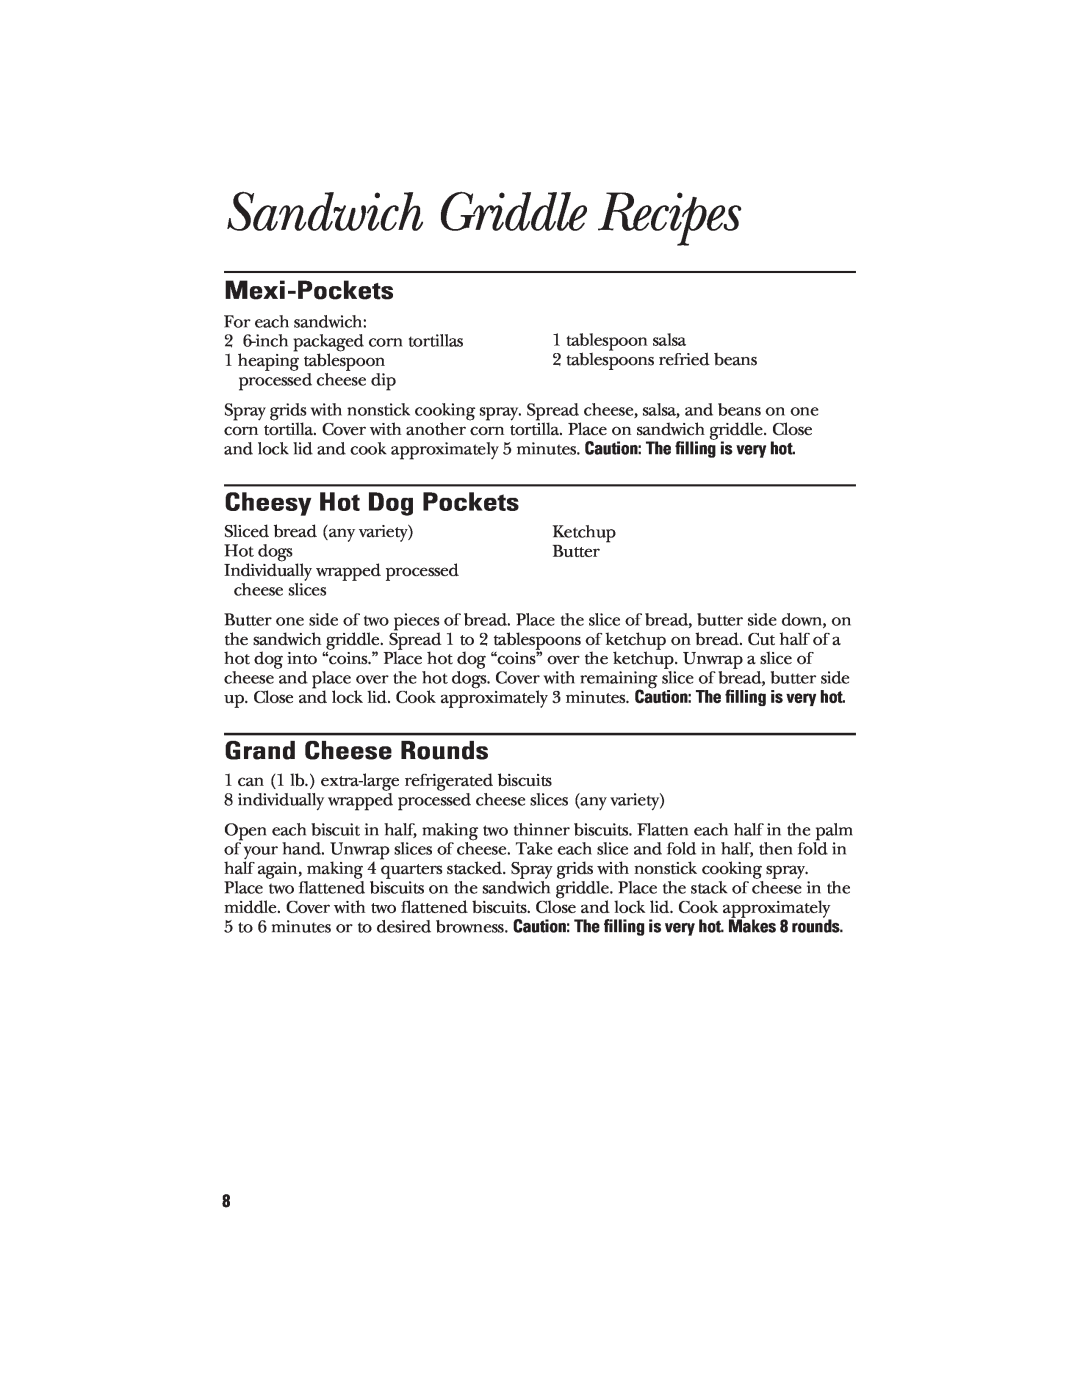 GE 840085700, 106582 manual Sandwich Griddle Recipes, Mexi-Pockets, Cheesy Hot Dog Pockets, Grand Cheese Rounds 